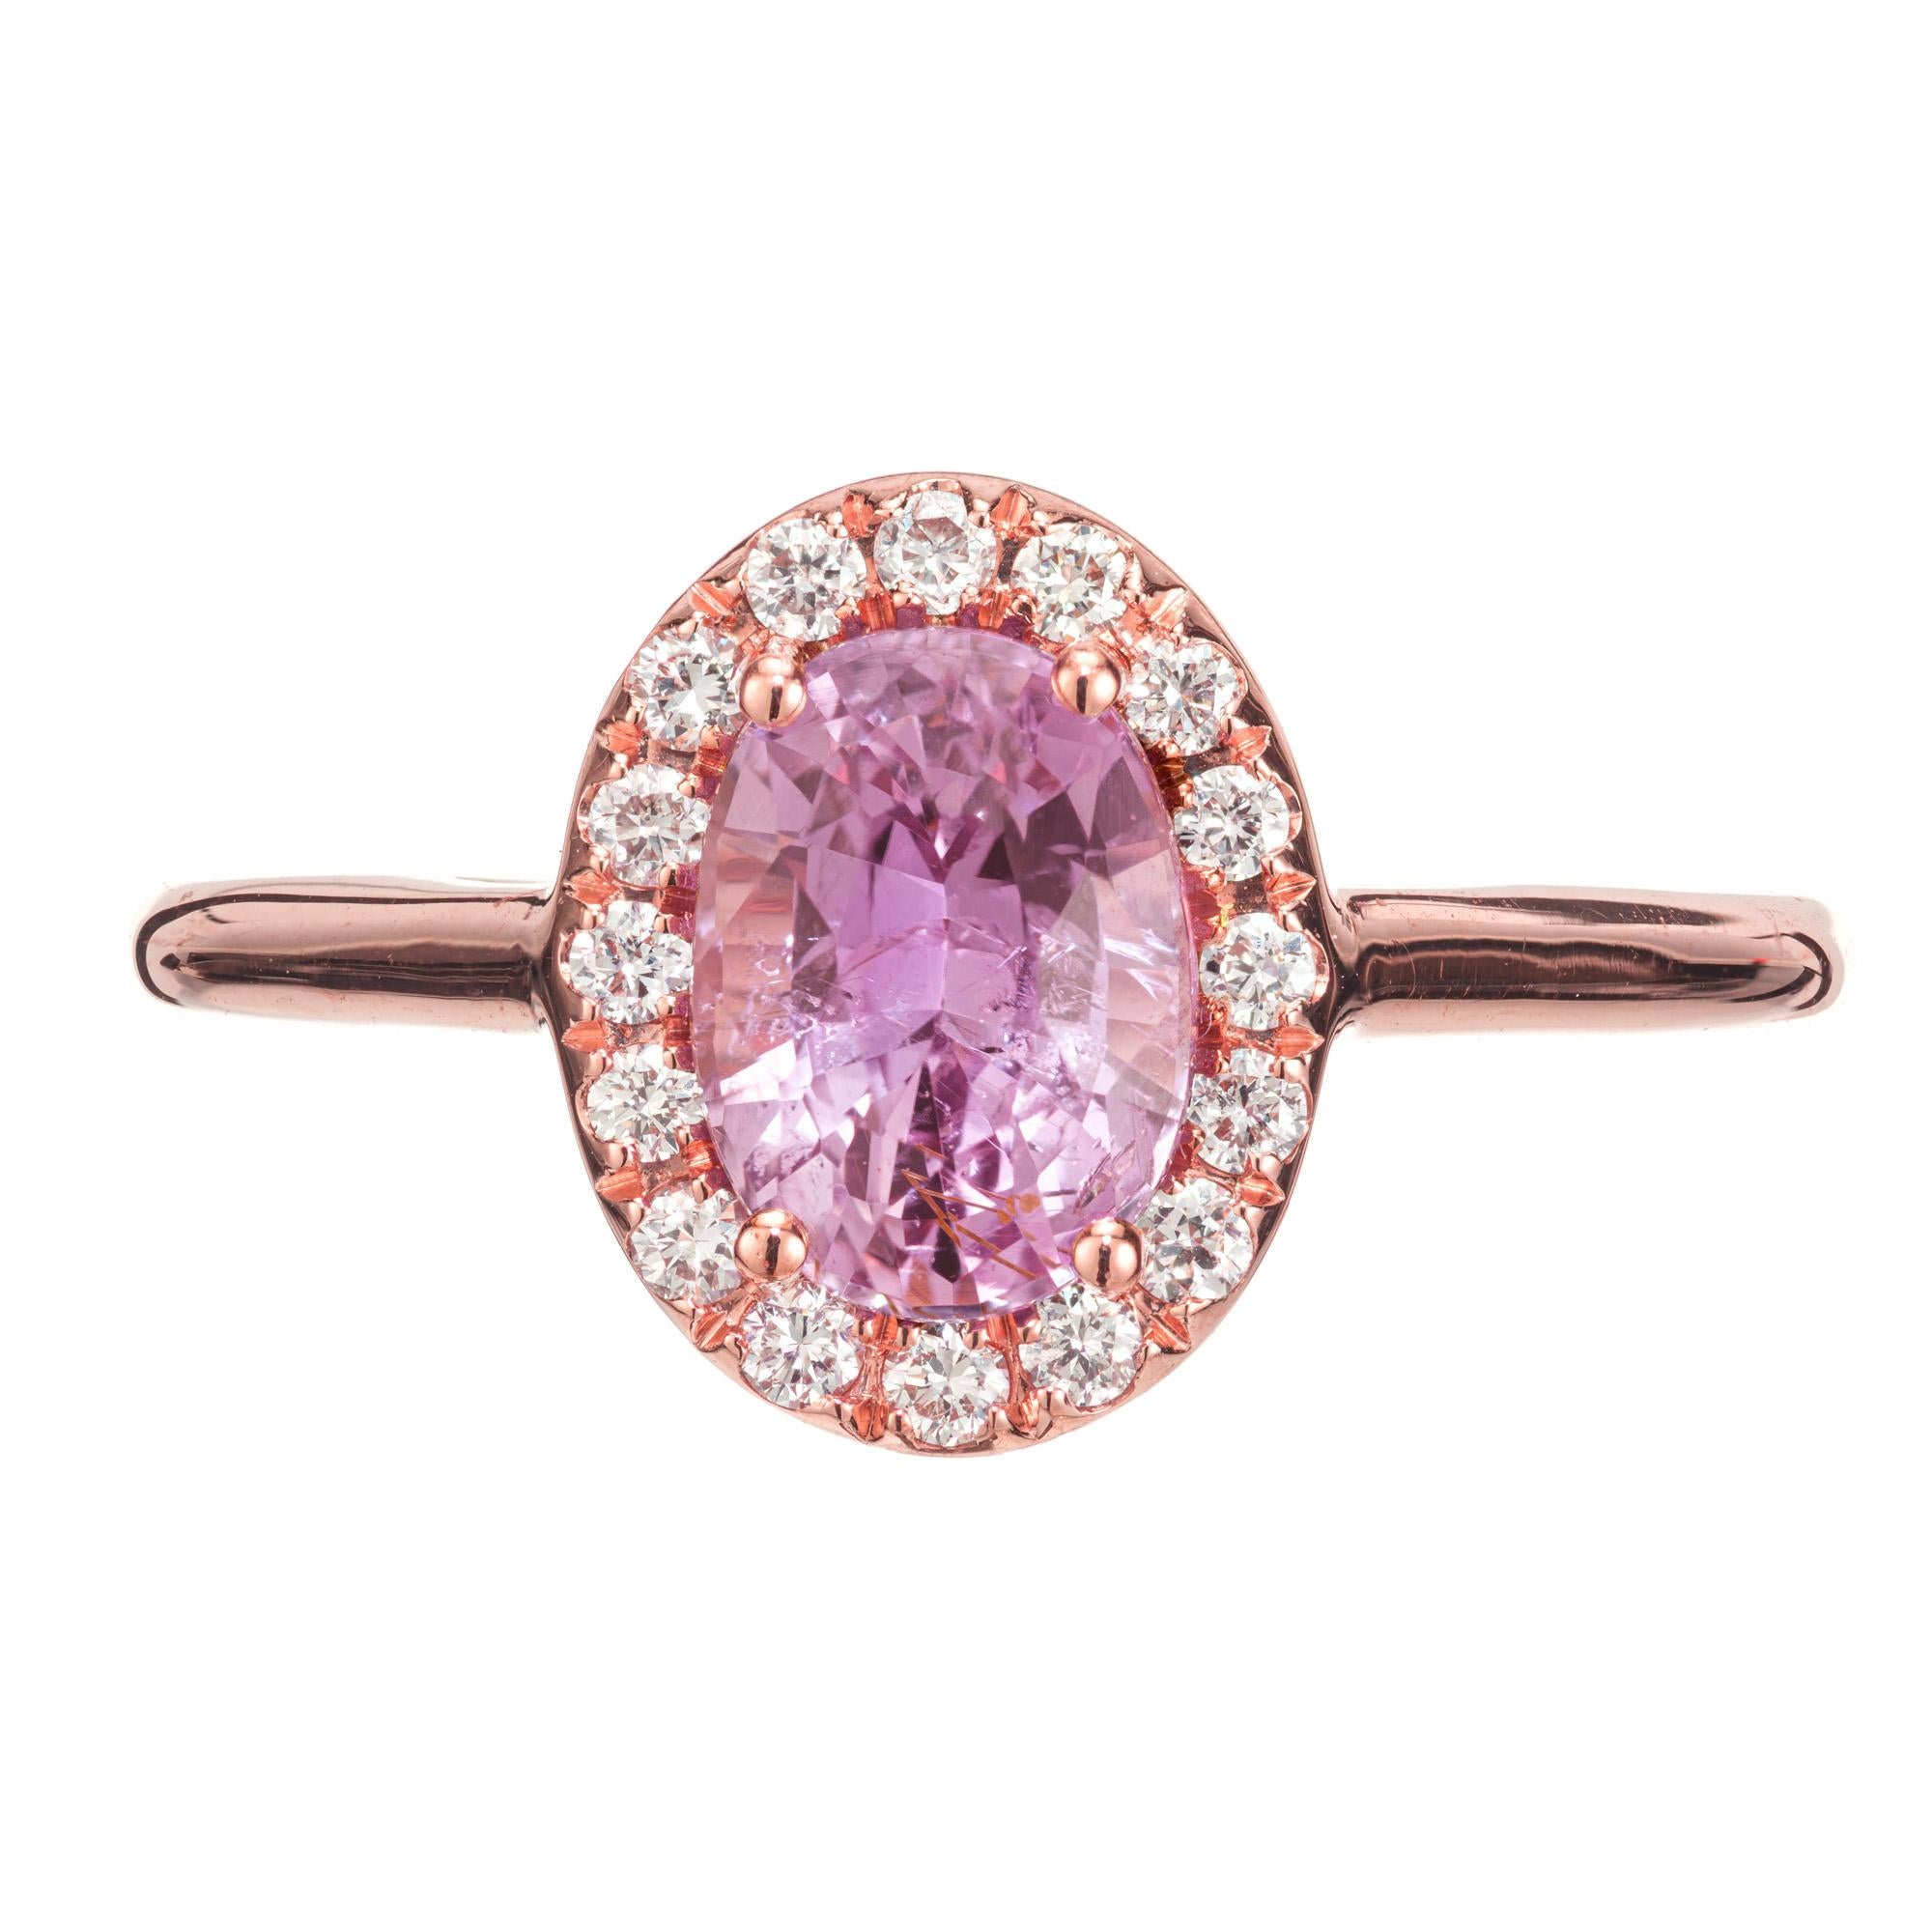 Bright pink sapphire and diamond engagement ring. GIA certified oval 1.70 carat center sapphire in a 14k rose gold setting with a halo of 16 round brilliant cut diamonds. Designed and crafted in the Peter Suchy Workshop.

1 oval pink purple